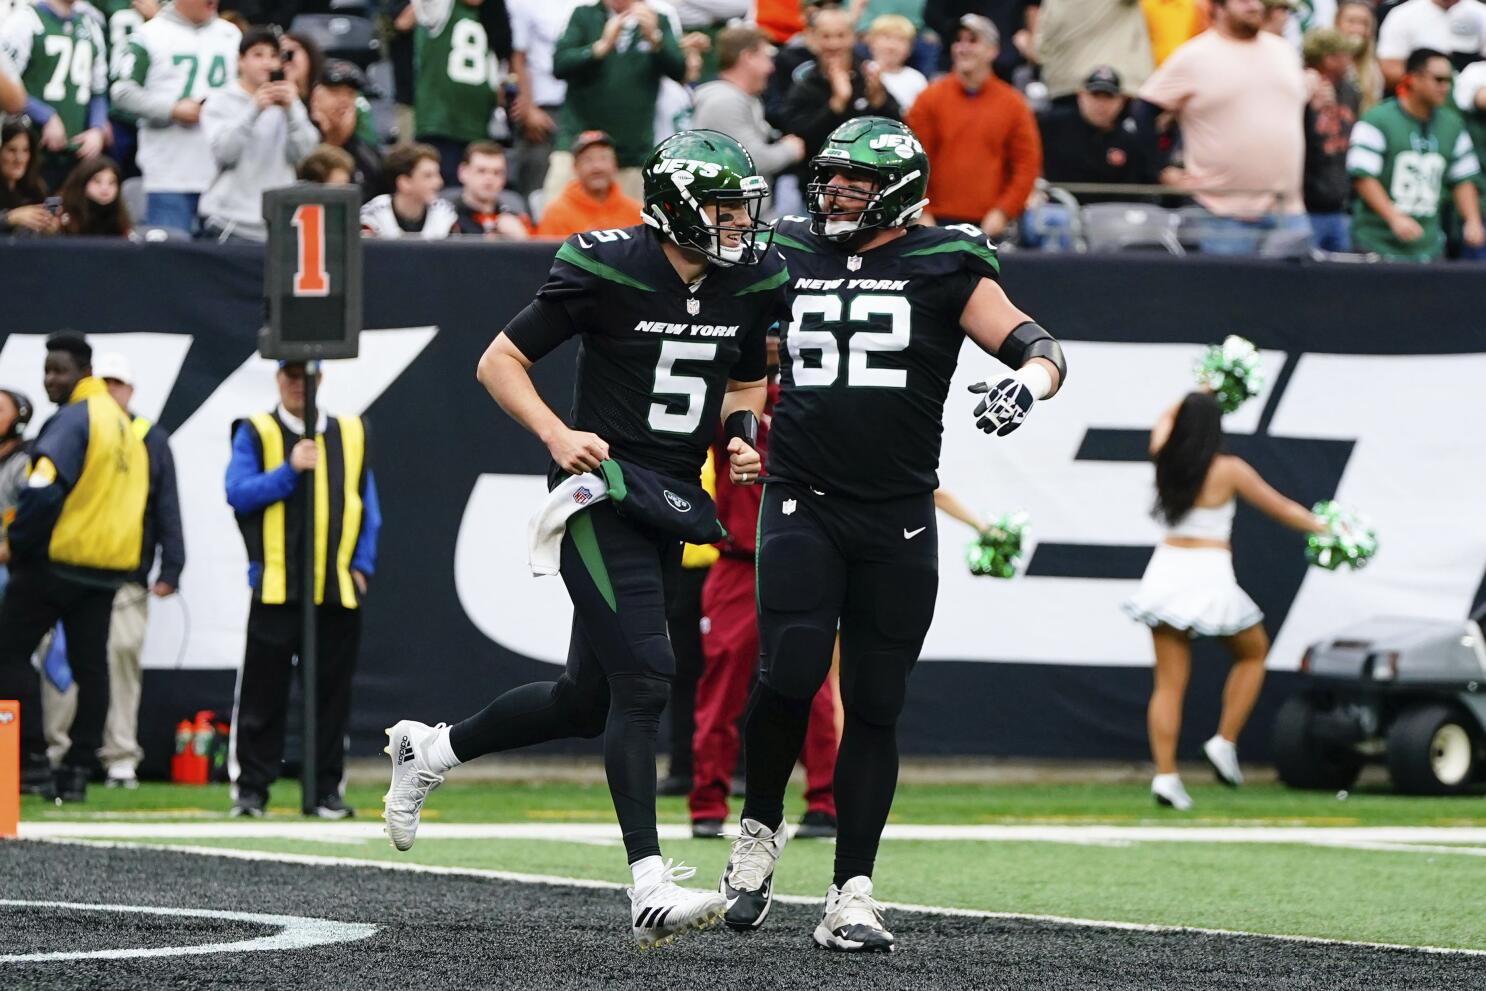 White steps in, leads Jets to wild 34-31 win over Bengals - The